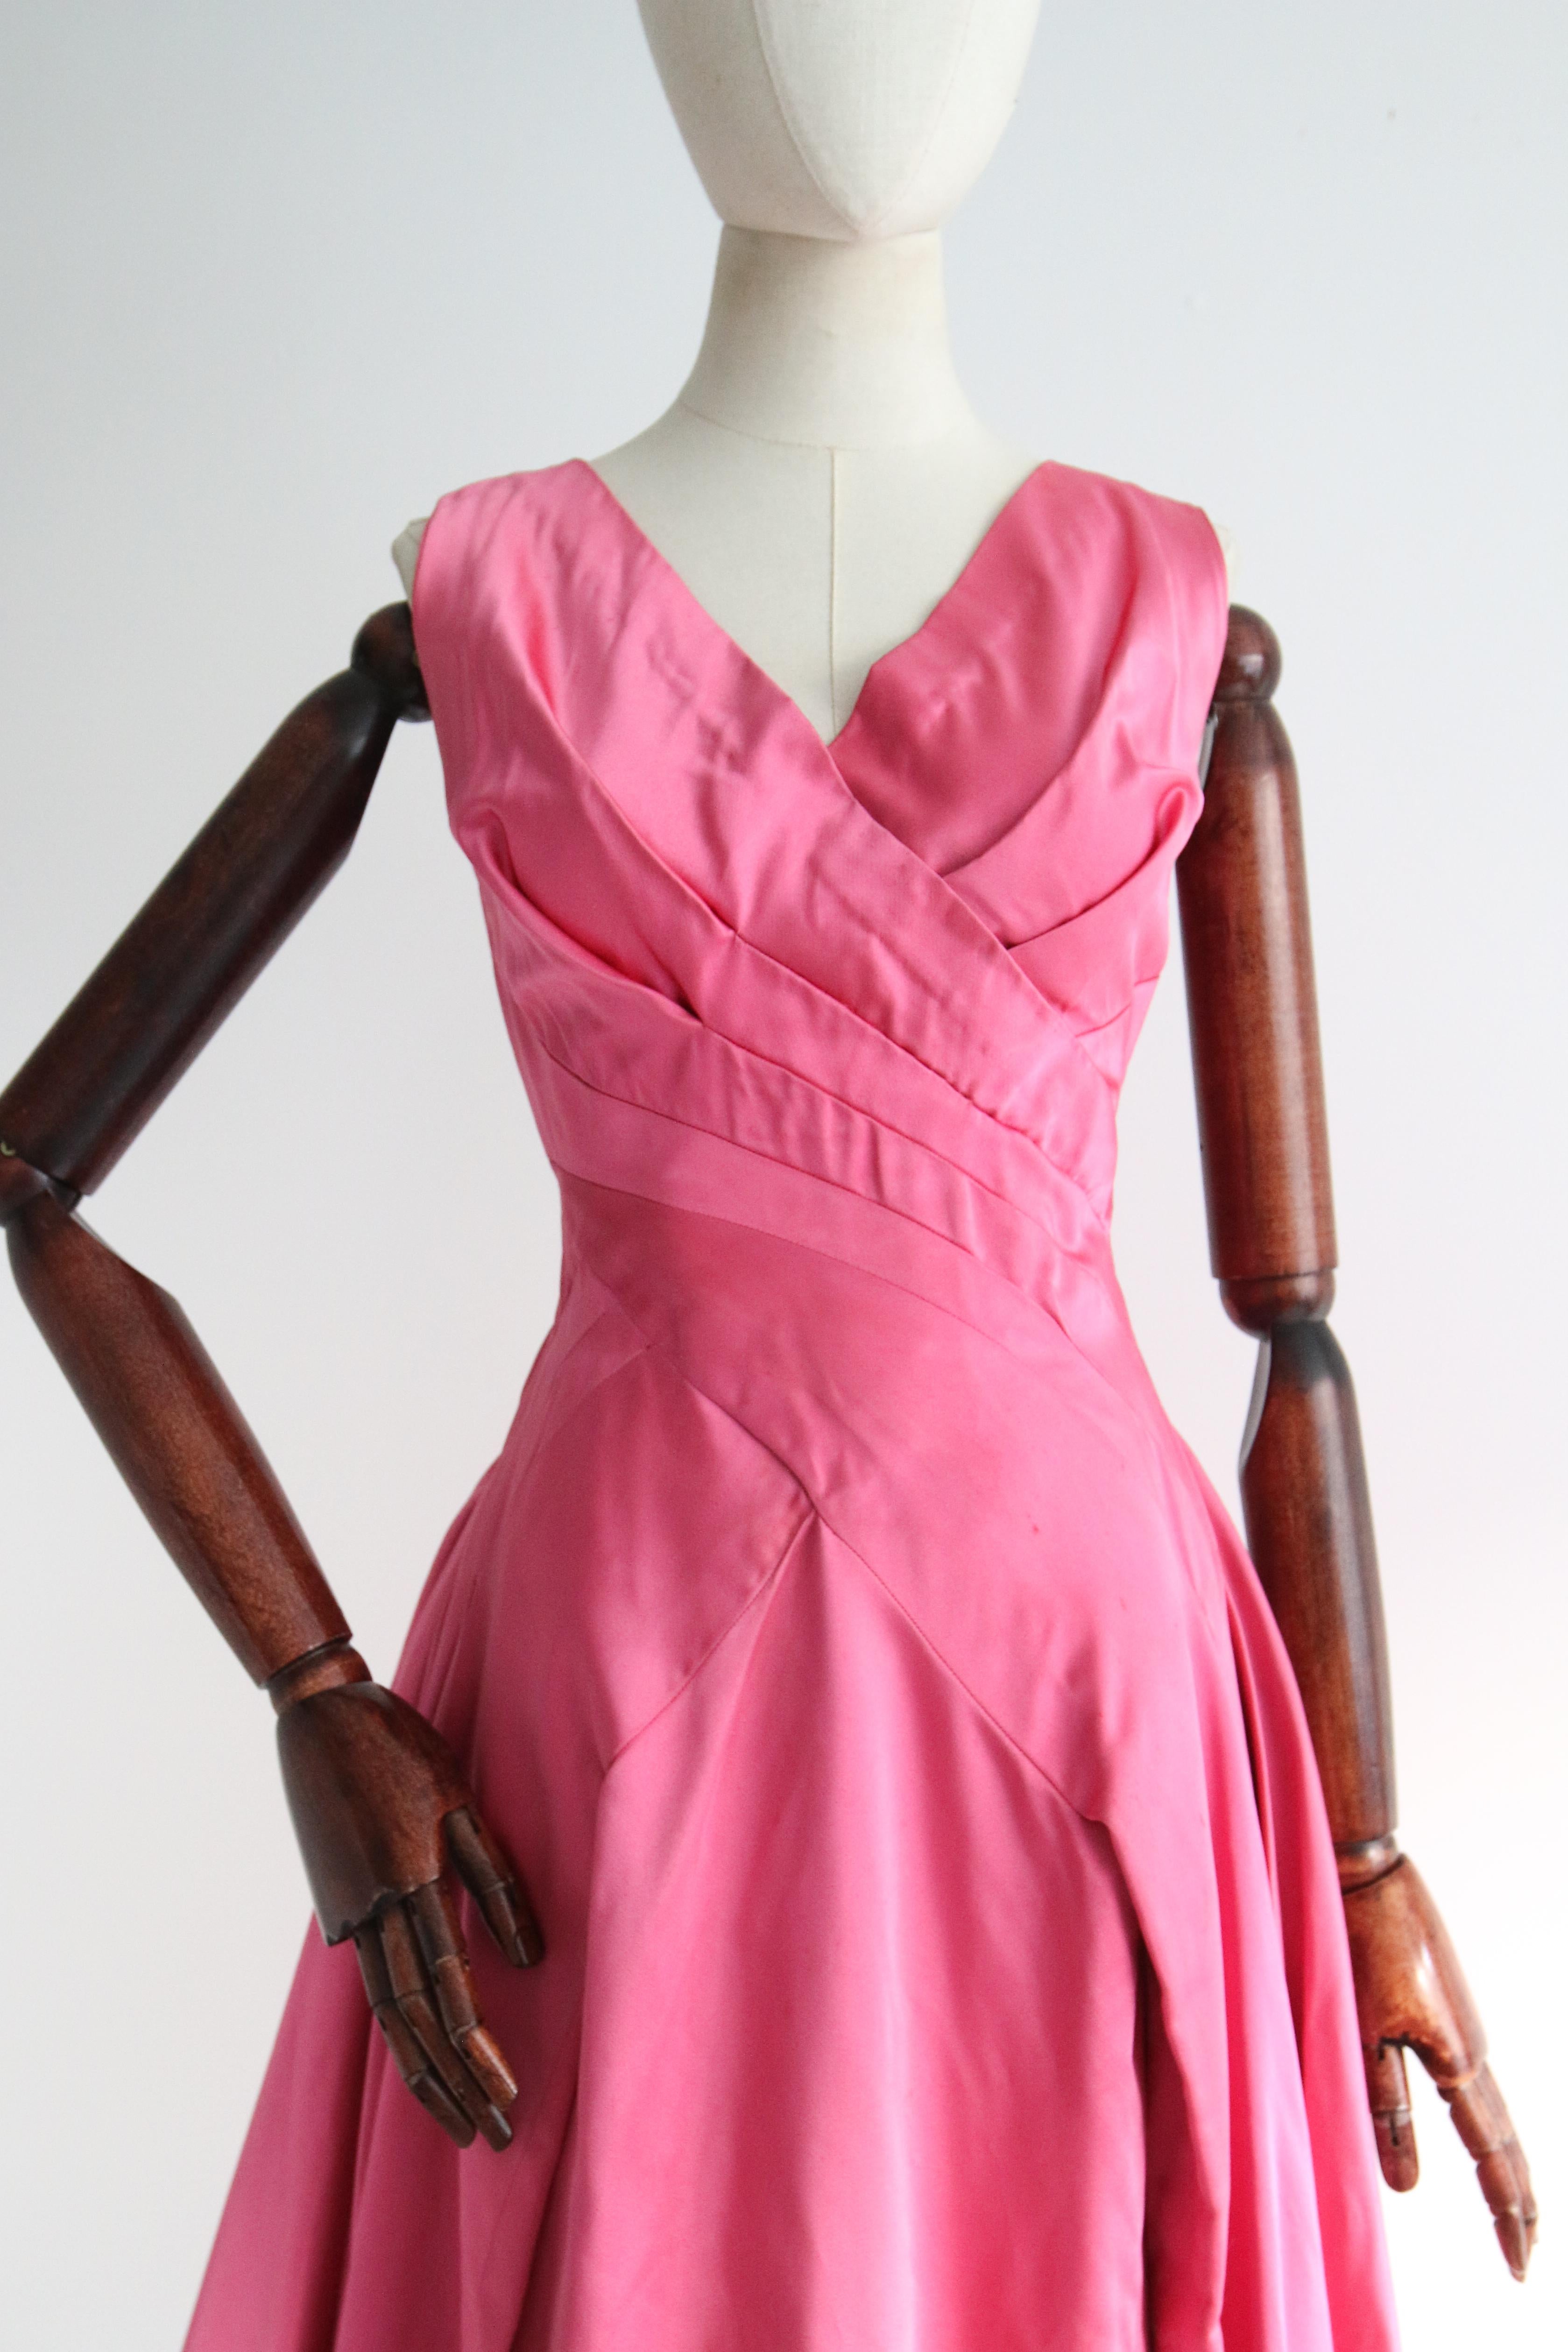 Vintage 1950's Duchess Satin Sweet Pink Pleated Dress UK 8-10 US 4-6 For Sale 1